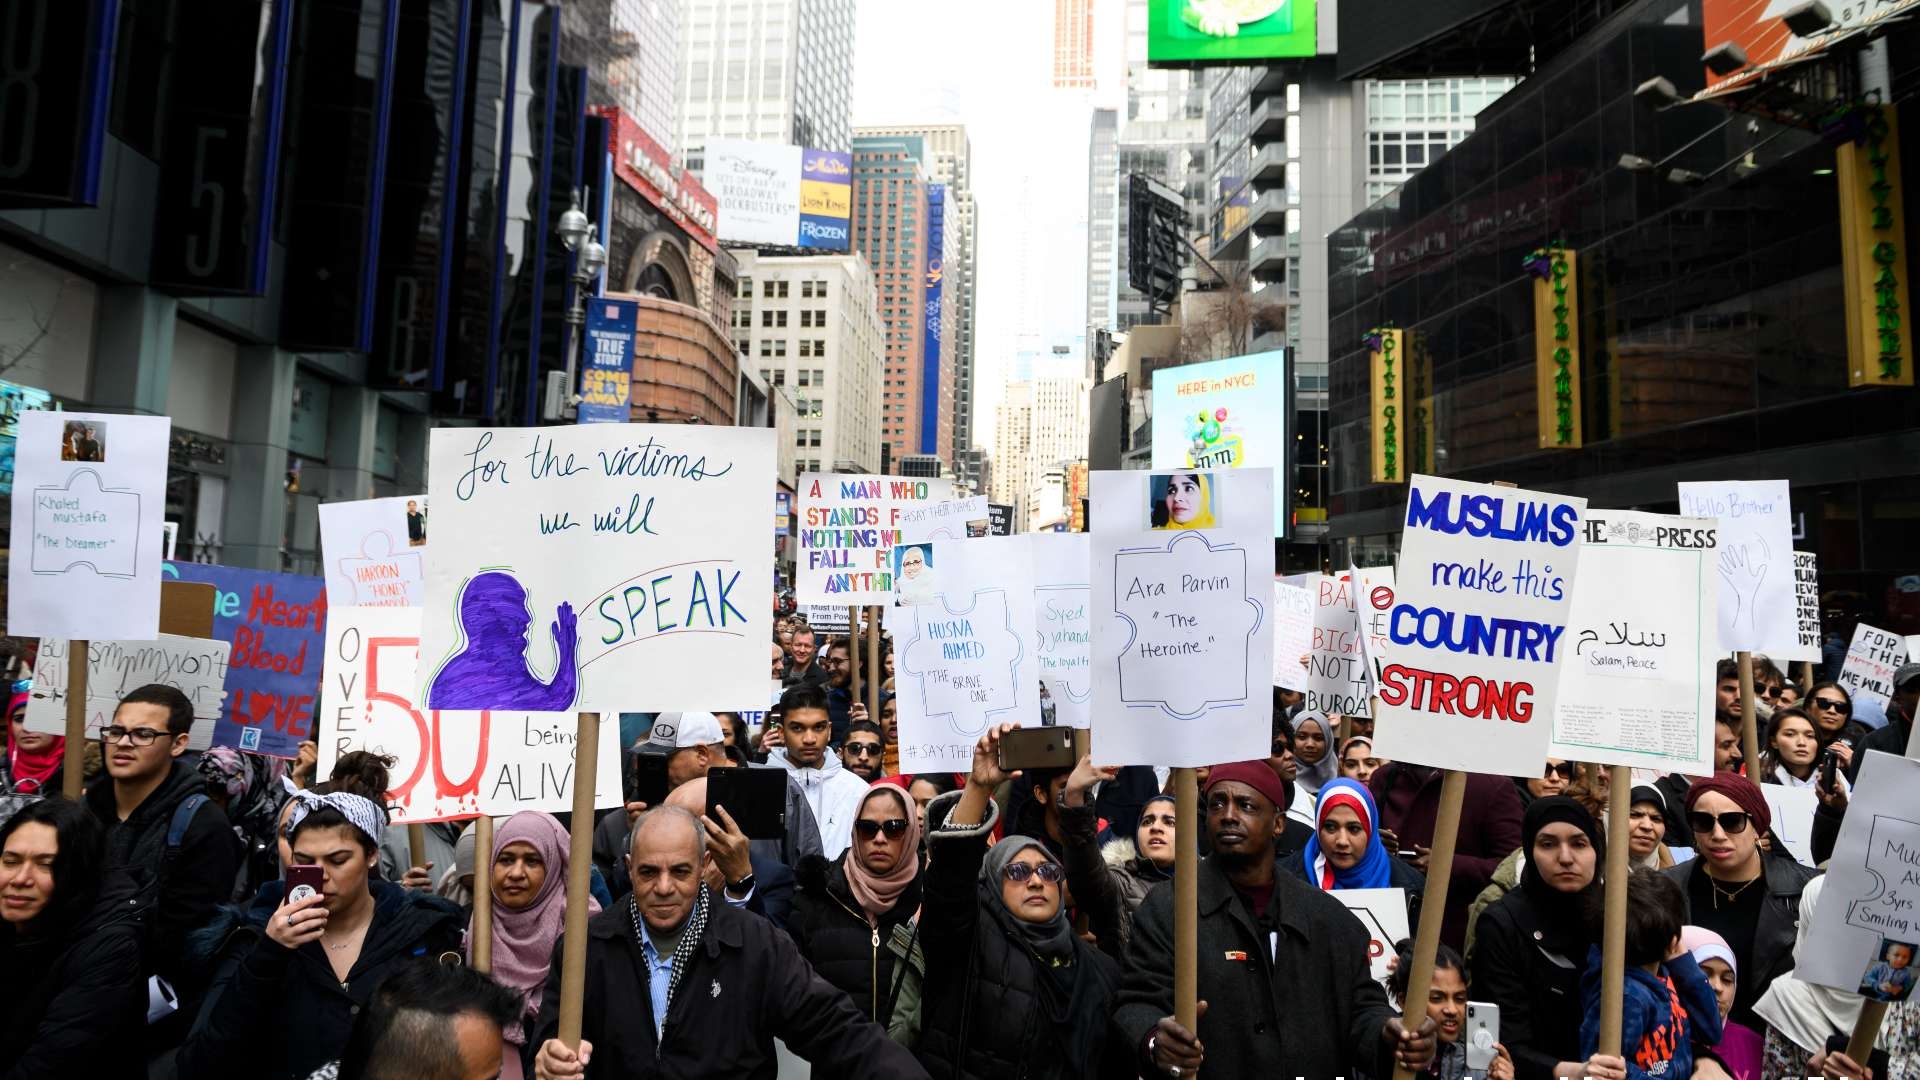 Demonstrators take part in a protest against growing Islamophobia, white supremacy, and anti-immigrant bigotry following the attacks at Christchurch New Zealand on 24 March 2019 at the Time Square in New York City.